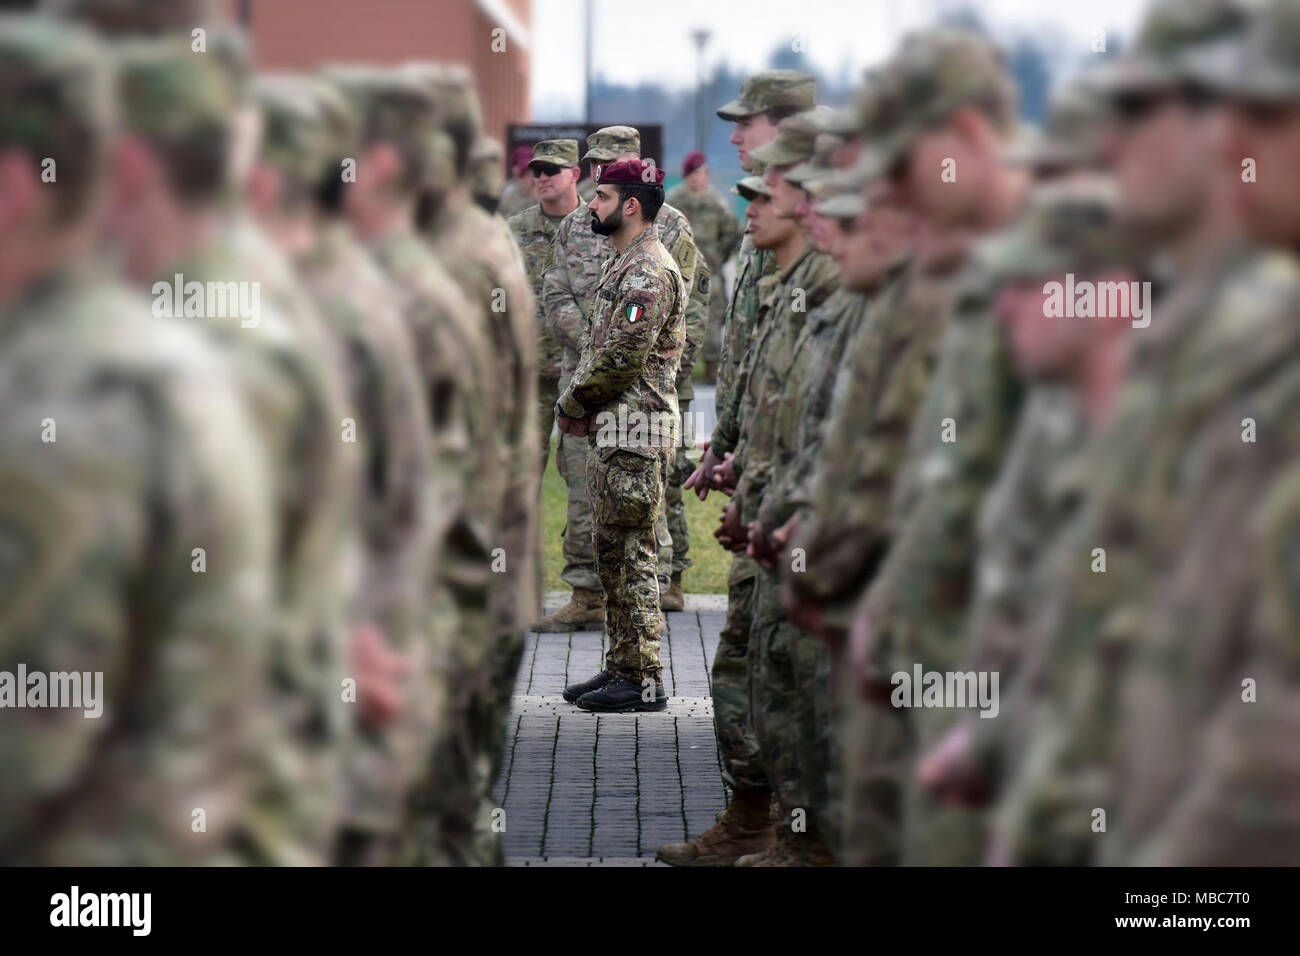 A Italian Army Soldier stands in formation during the Expert Infantryman Badge (EIB) ceremony at Caserma Del Din, Vicenza, Italy, 15 Feb. 2018. (U.S. Army Stock Photo